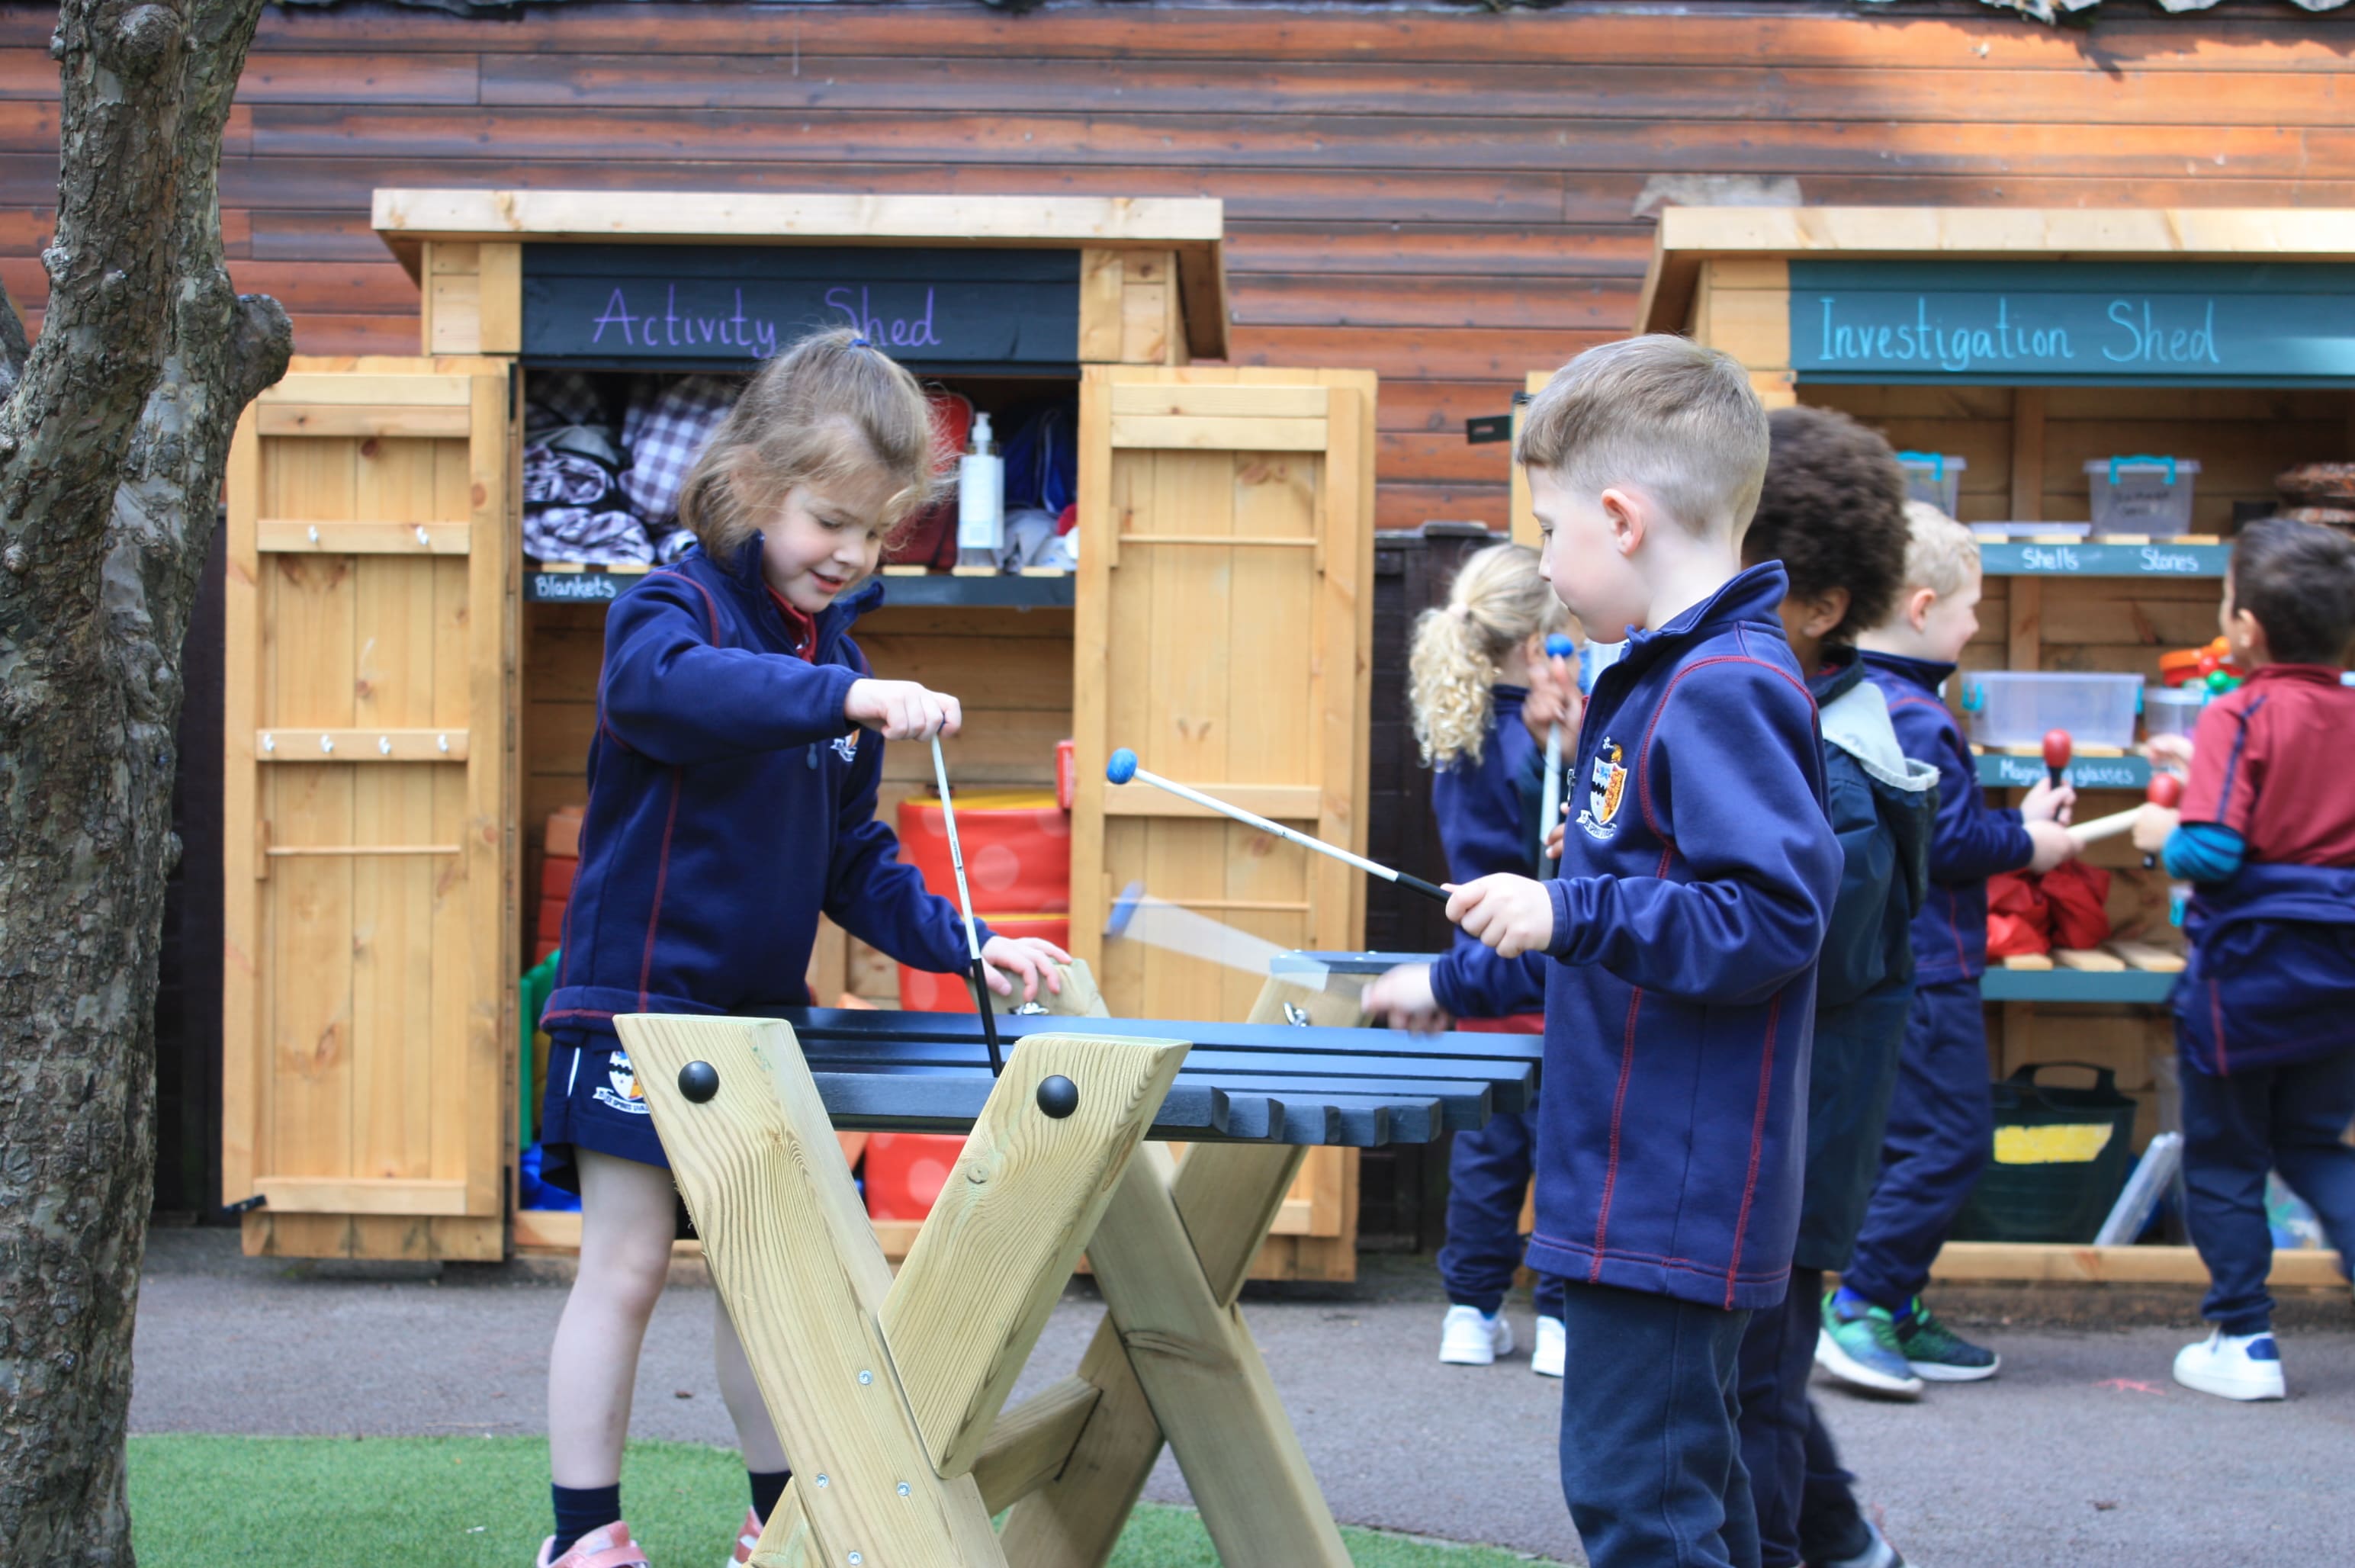 2 children are playing with a mini xylophone and in an area of the playground. Two playground storage cupboards can be seen saying "Activity Shed" and "Investigation Shed" as the two children hit the Xylophone with the xylophone sticks.